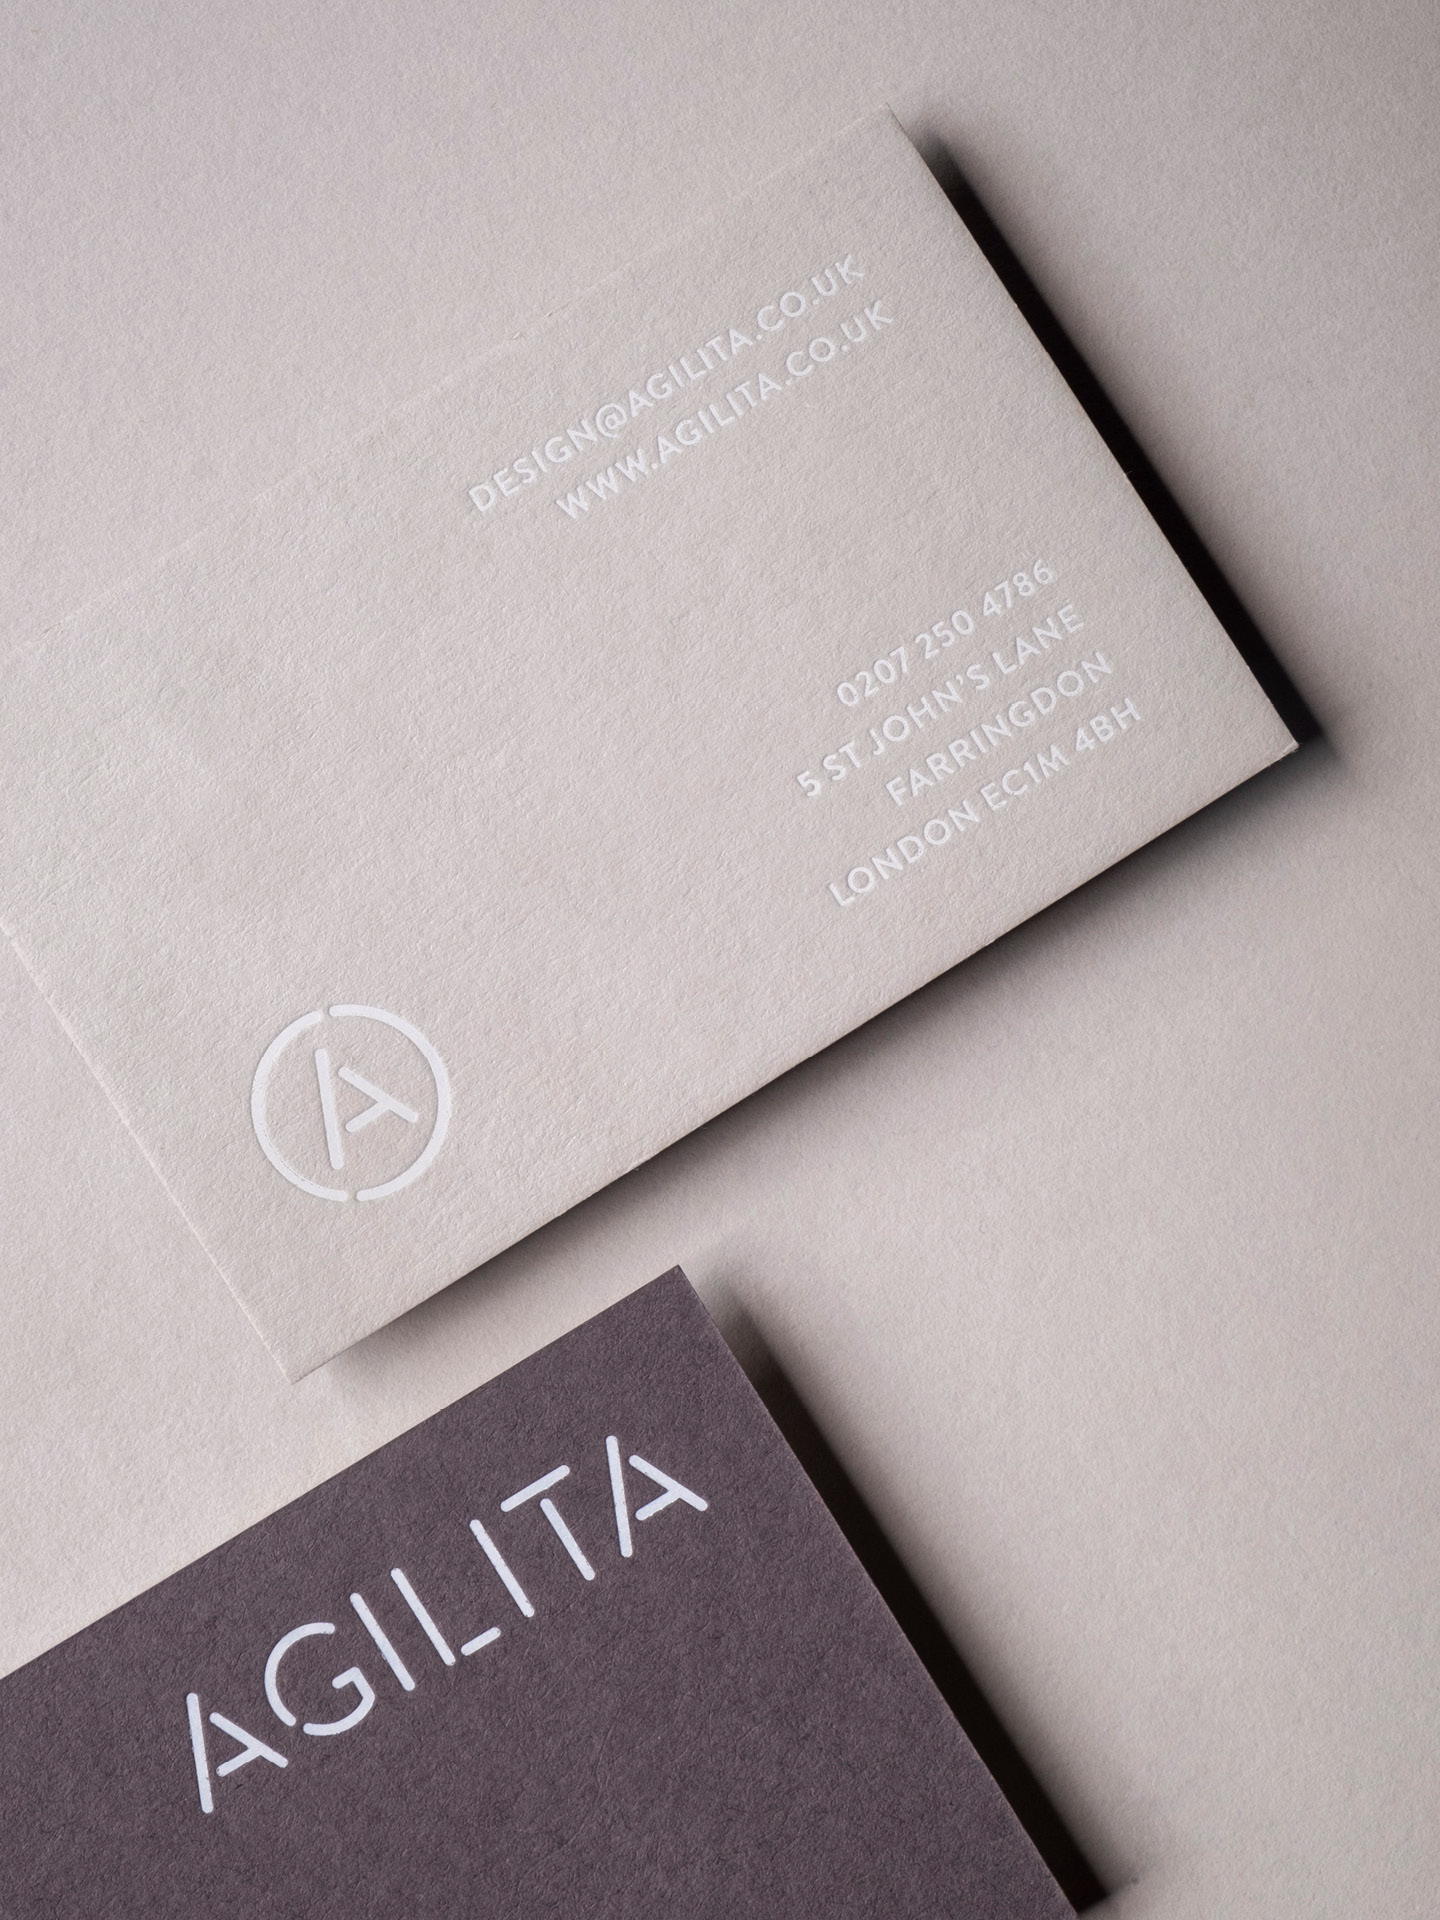 Close up image of the business cards printed with duplexed pale grey and dark grey with white foil on both sides